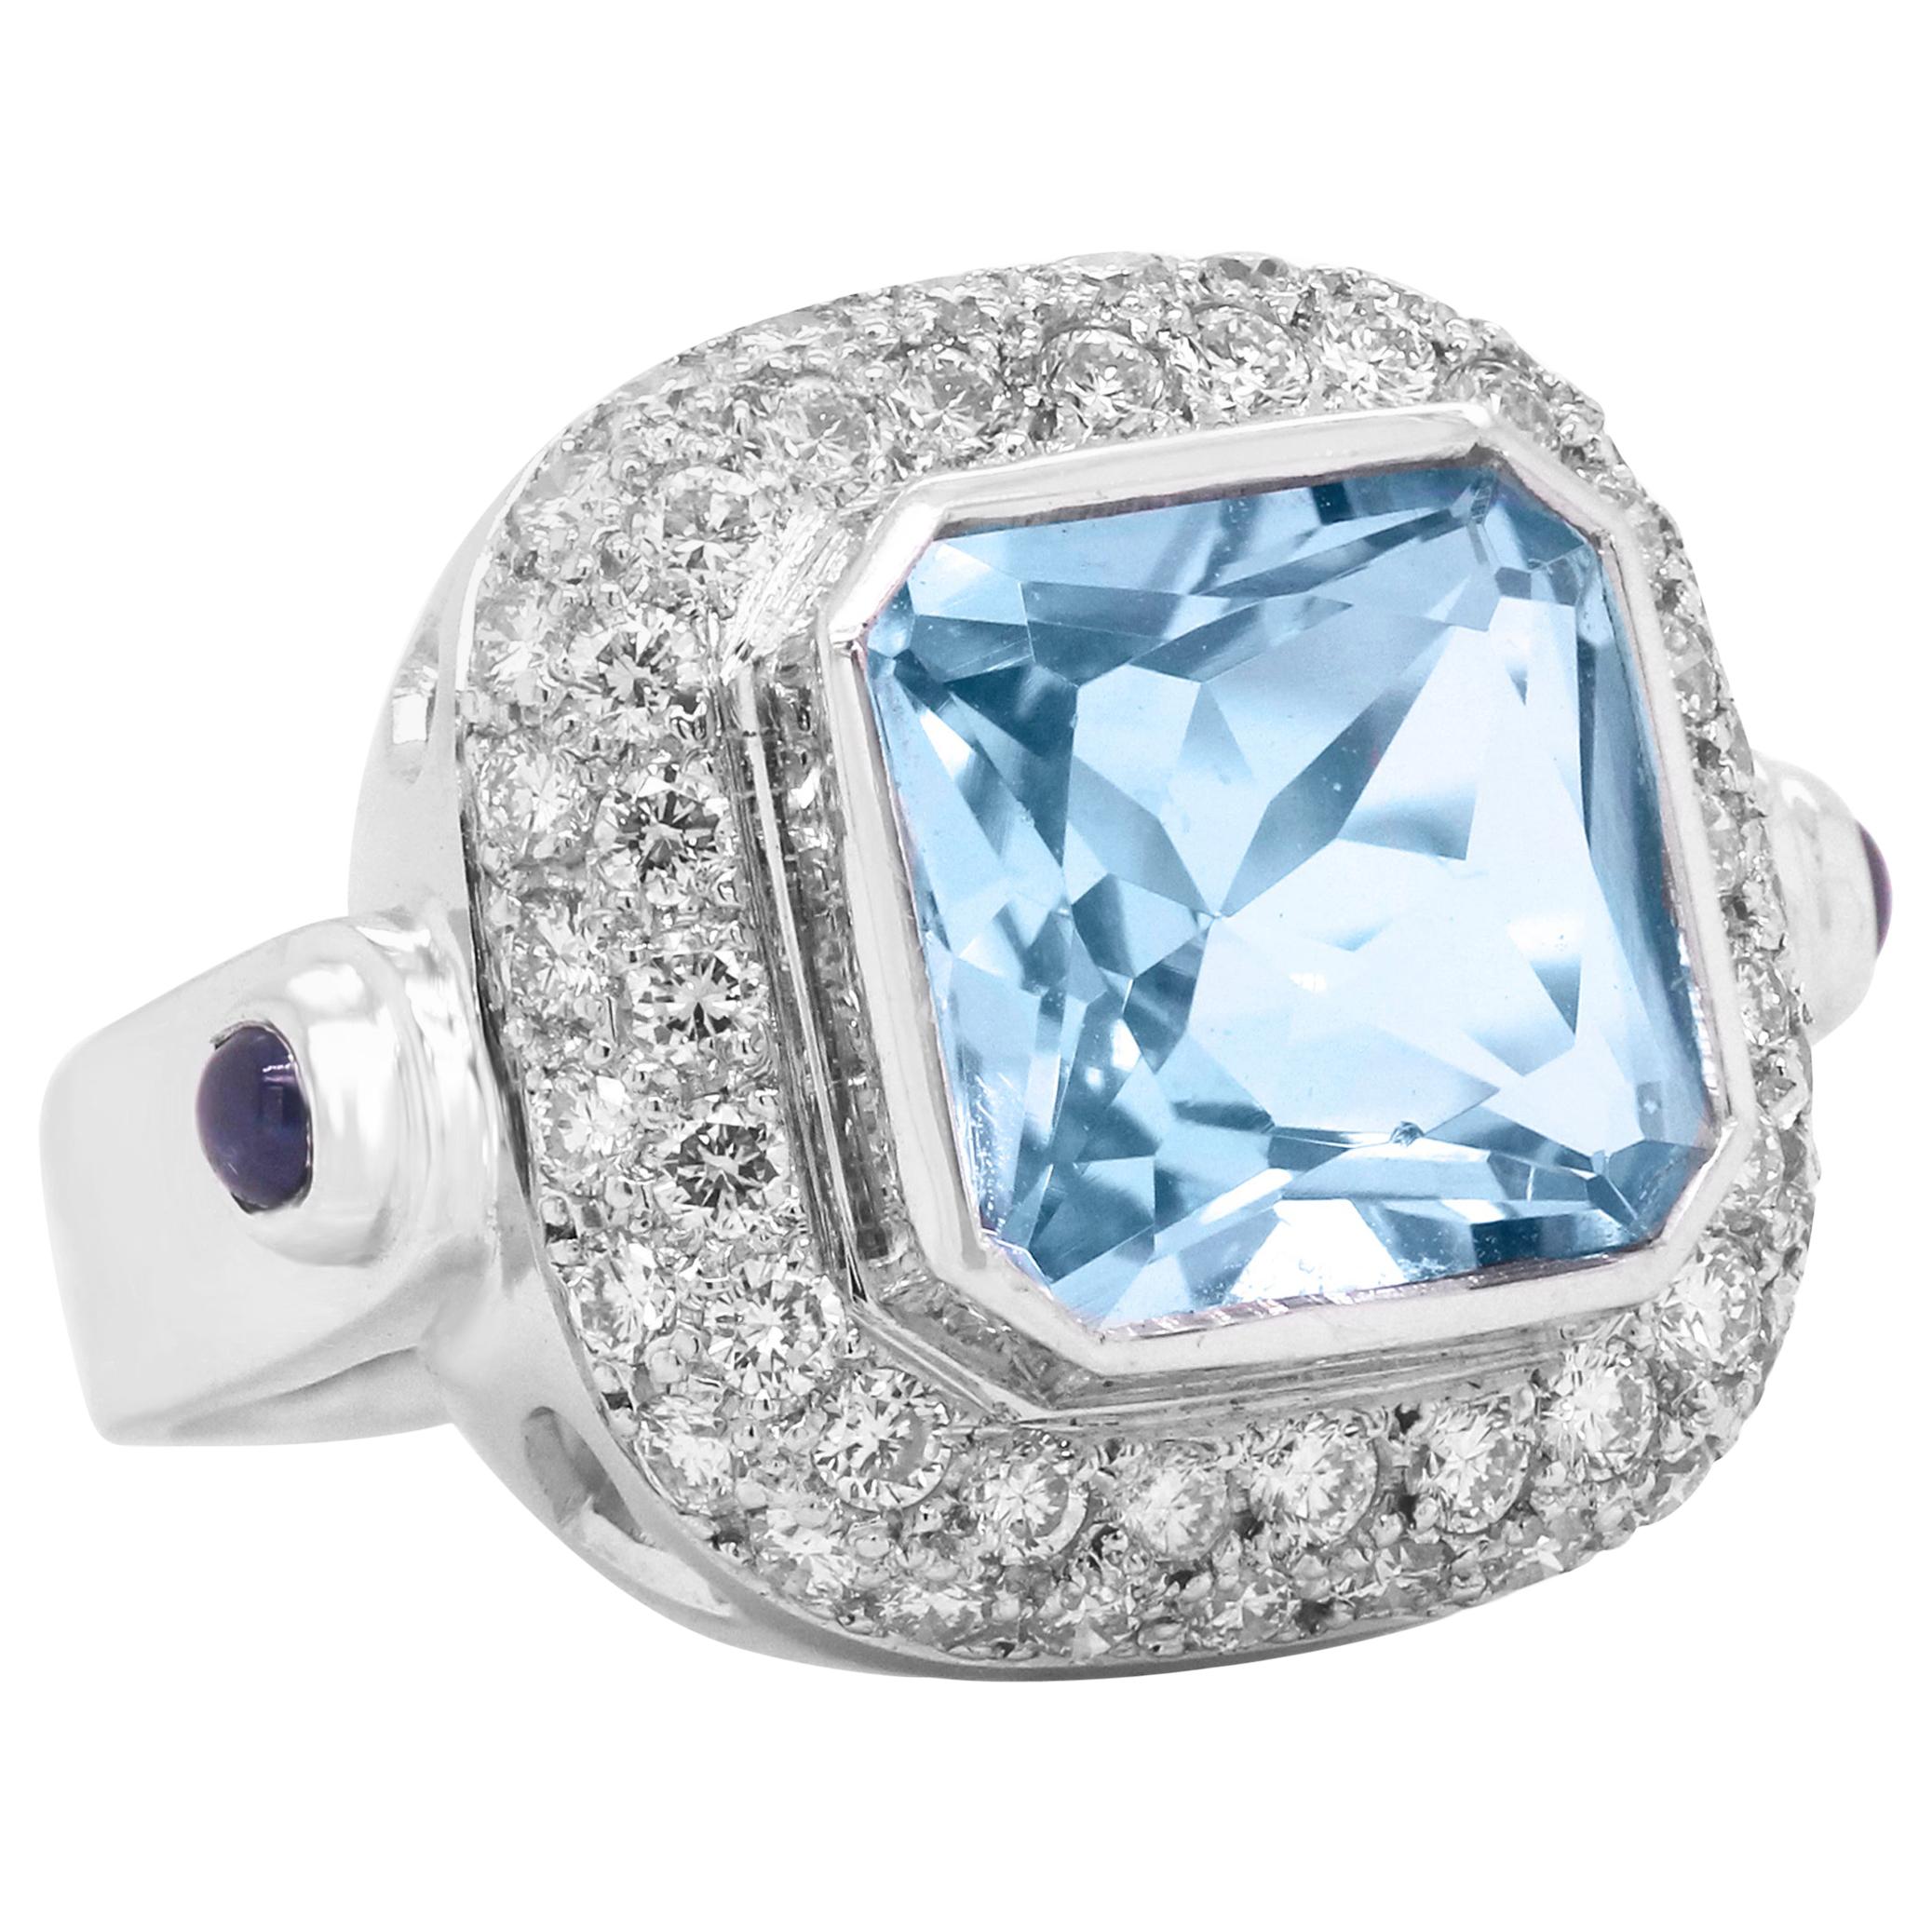 White Gold and Diamond Cocktail Ring with Cushion Cut Aquamarine Center